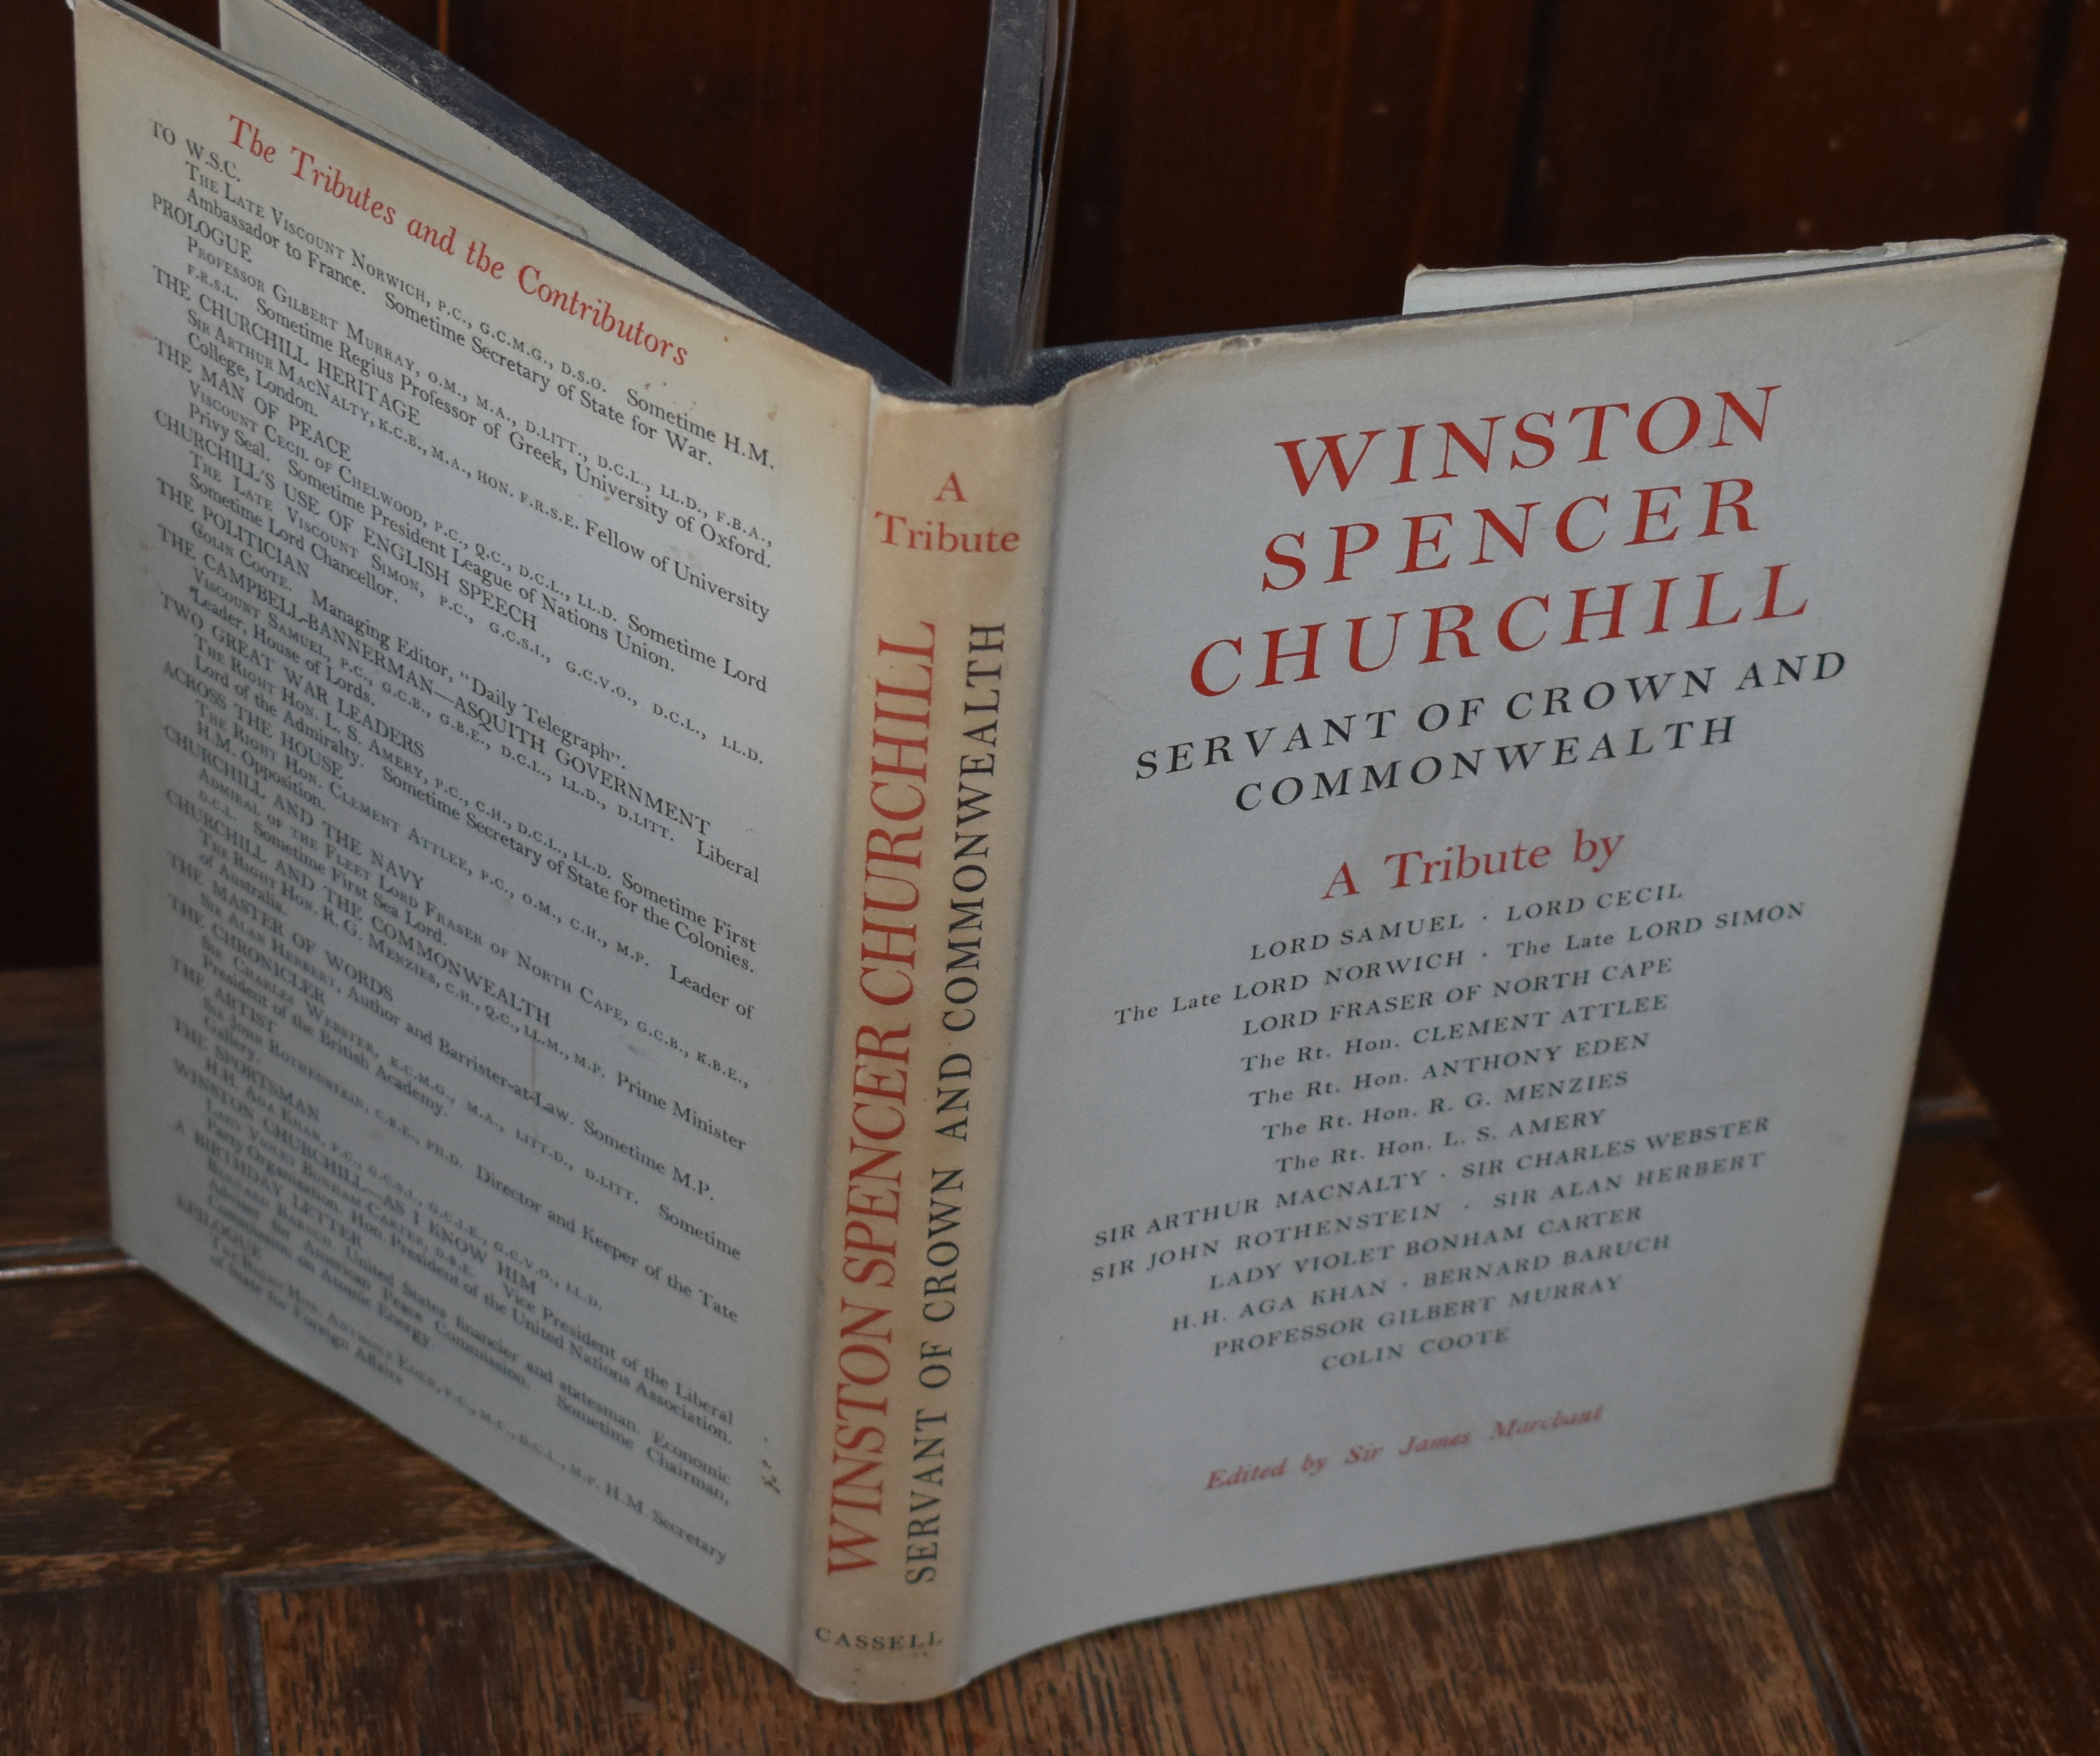 WINSTON SPENCER CHURCHILL, SERVANT OF CROWN AND COMMONWEALTH, A TRIBUTE BY VARIOUS HANDS PRESENTED TO HIM ON HIS EIGHTIETH BIRTHDAY. - VARIOUS , ED BY SIR JAMES MARCHANT